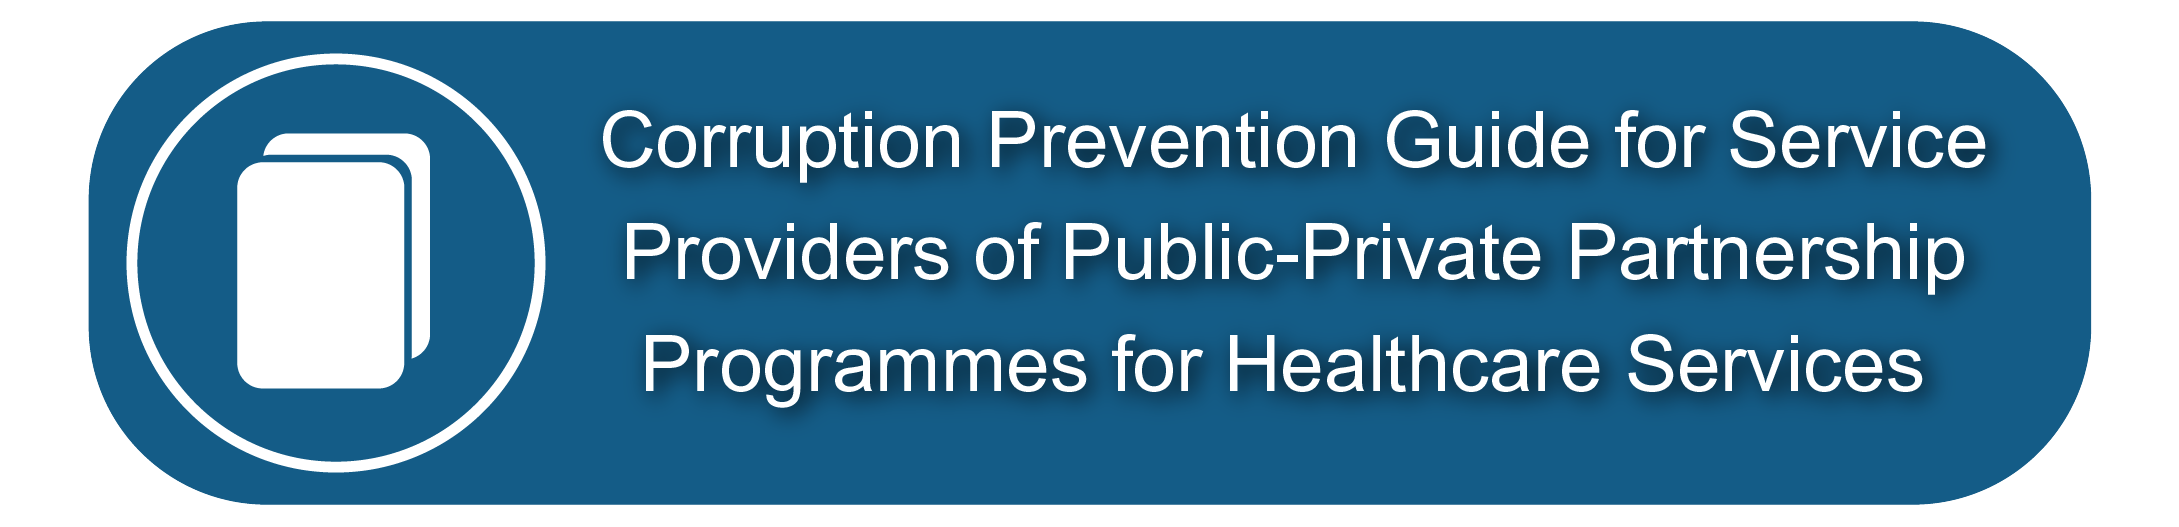 Corruption Prevention Guide for Service Providers of Public-Private Partnership Programmes for Healthcare Services